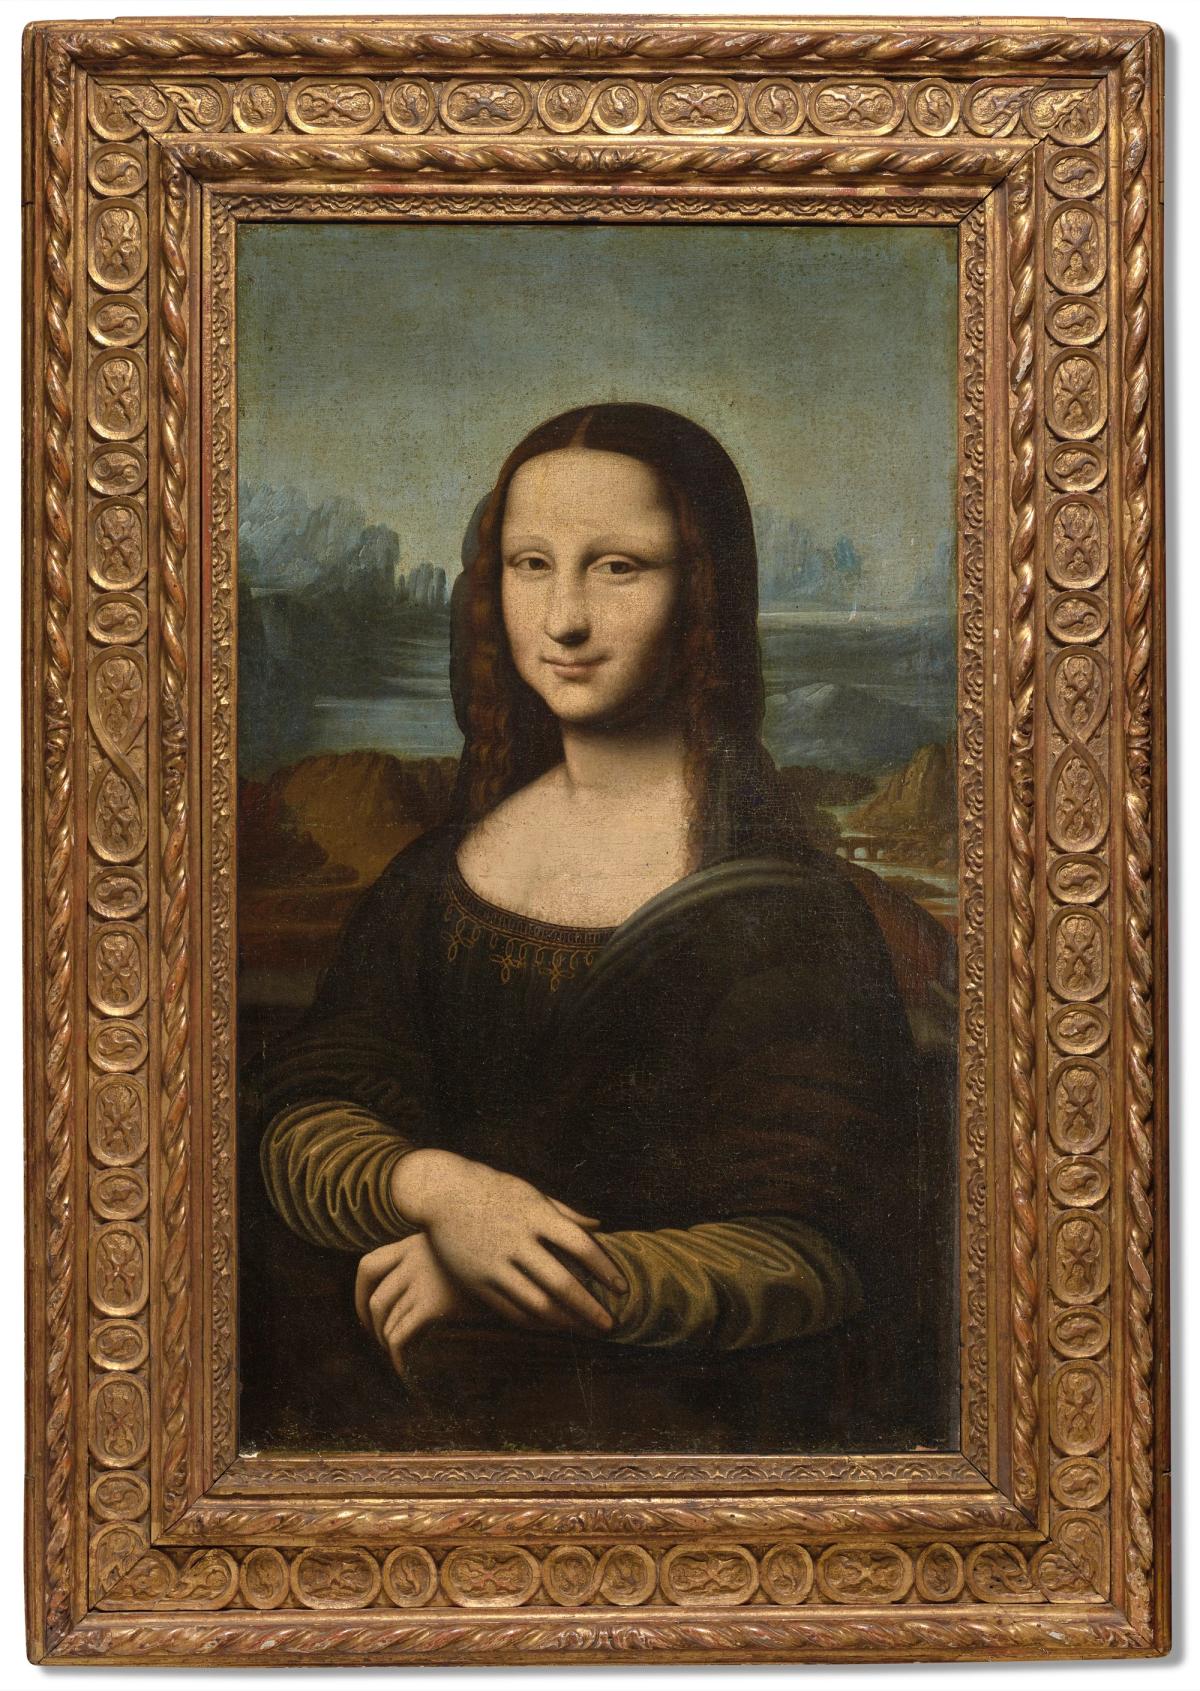 Faking it—Mona Lisa copy sells for €2.9m